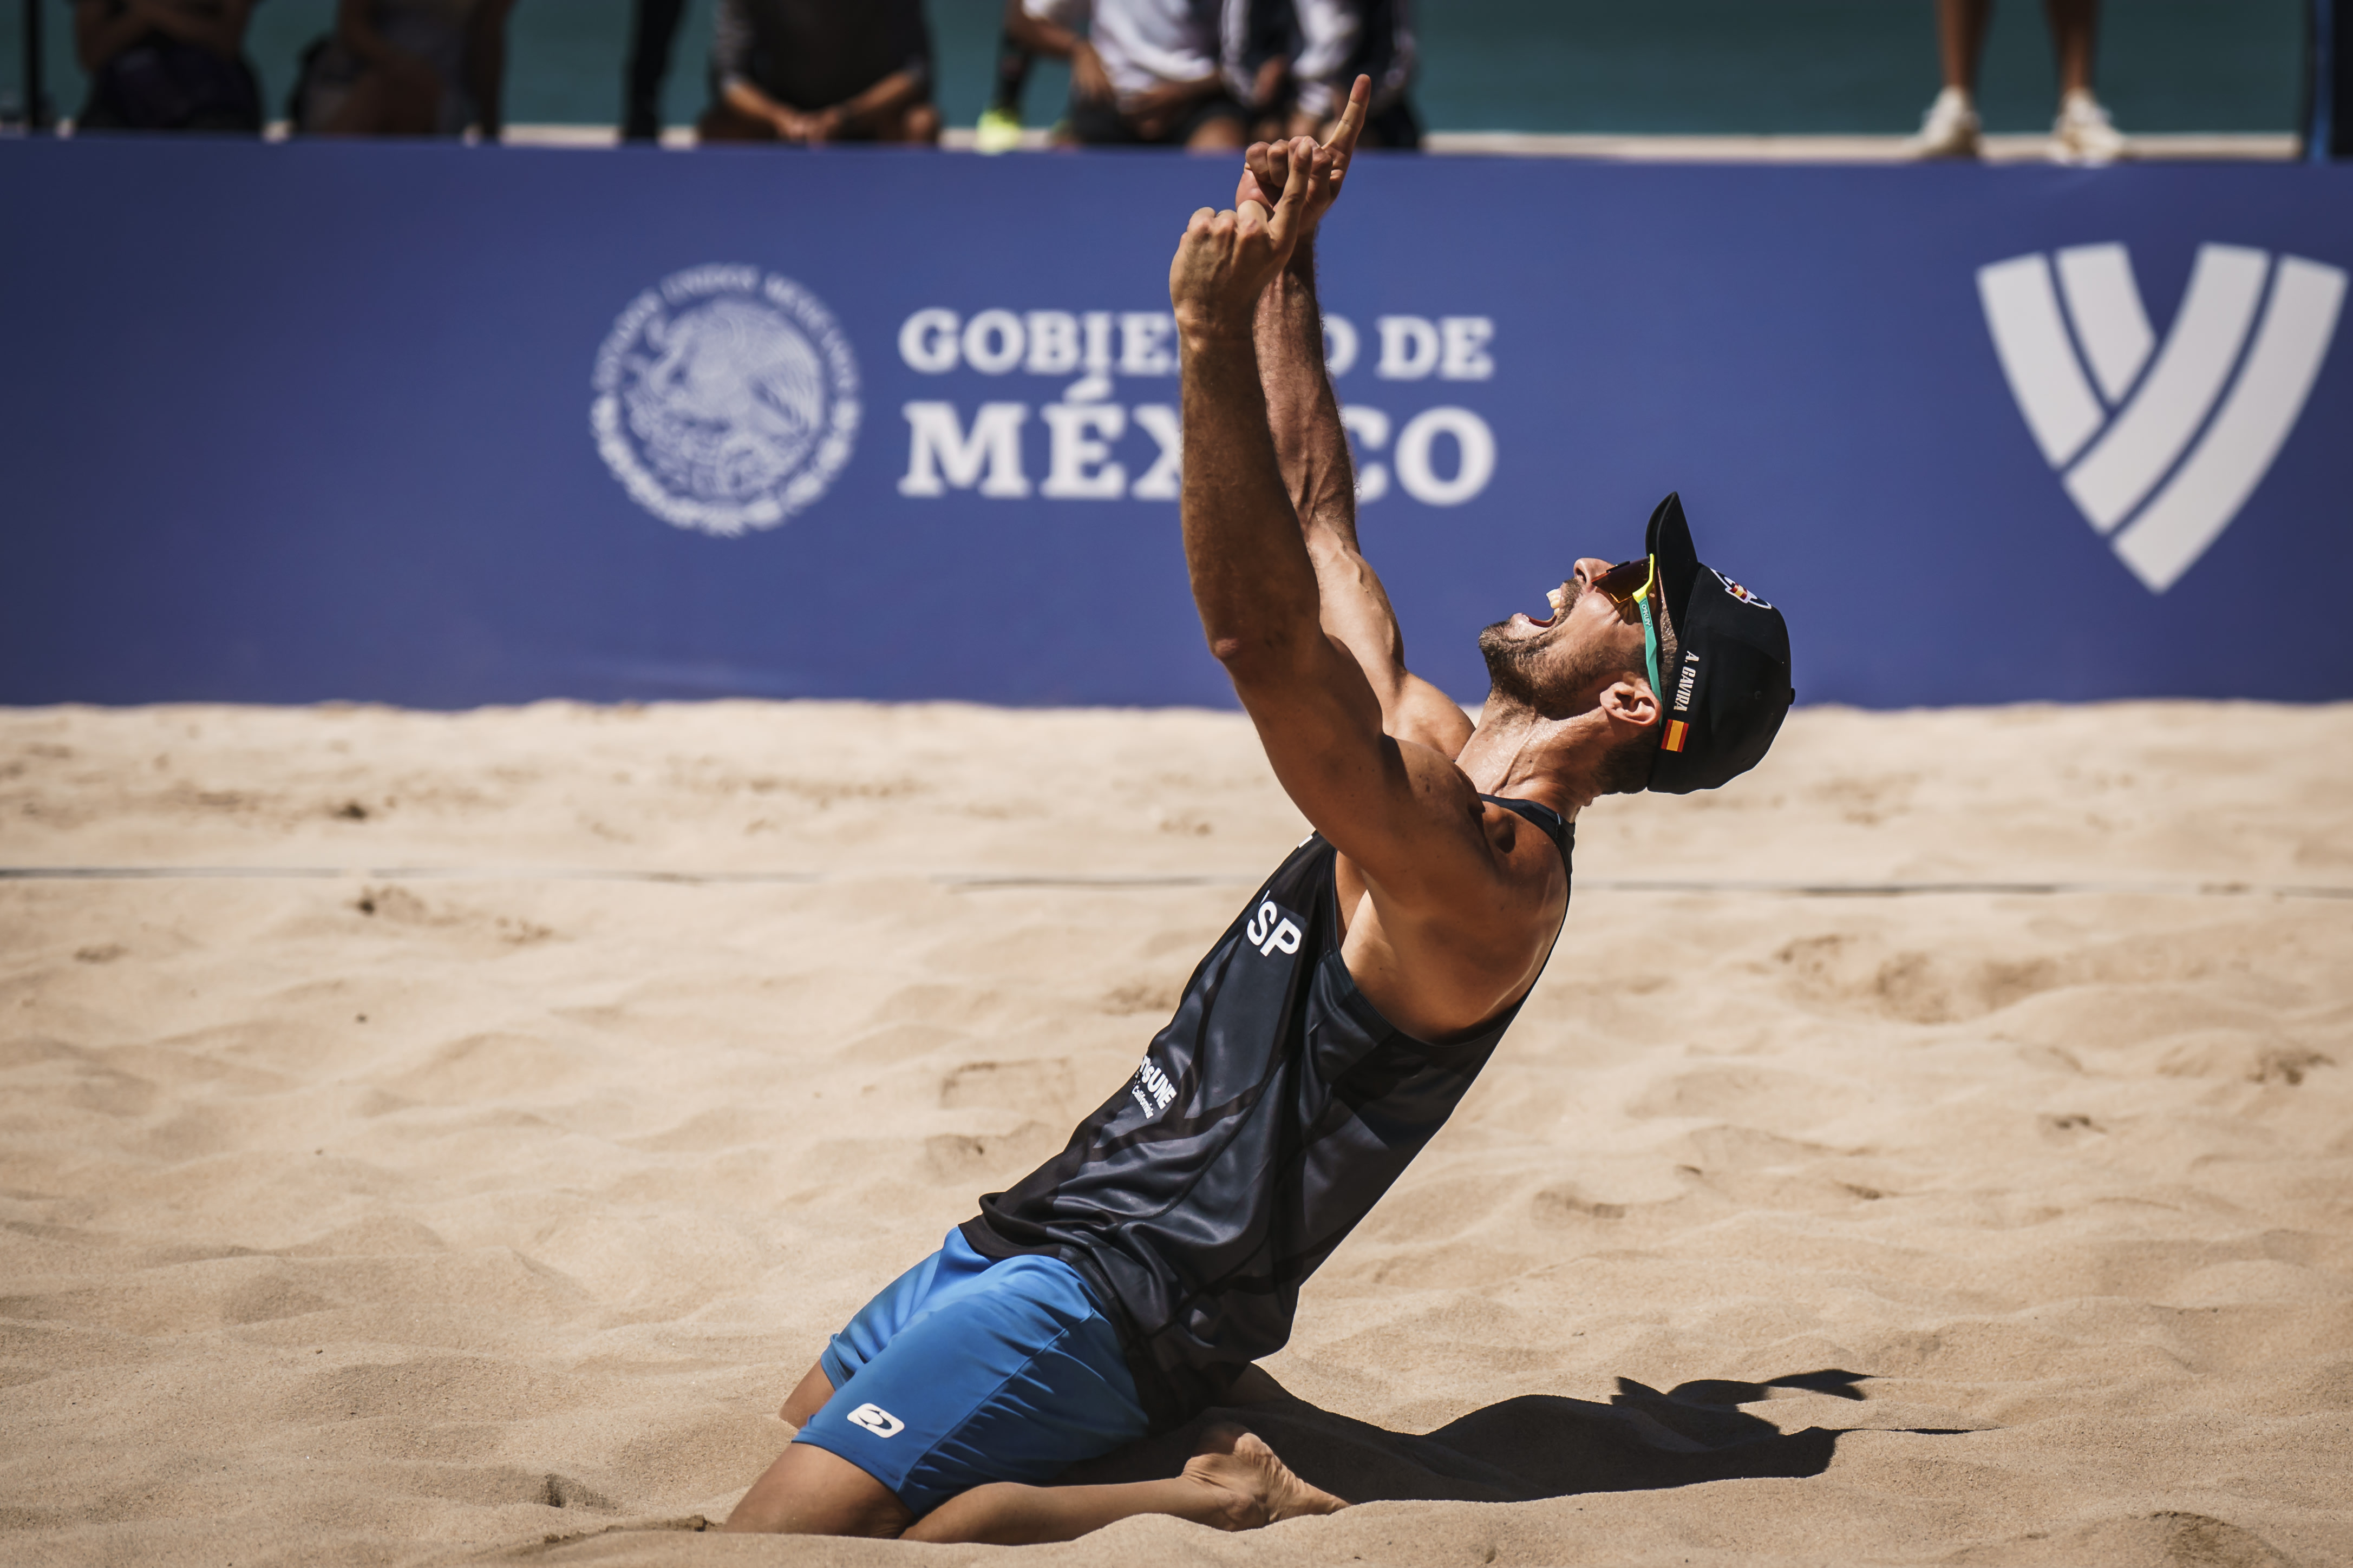 Watch the Tepic Elite16 qualifiers for free! volleyballworld